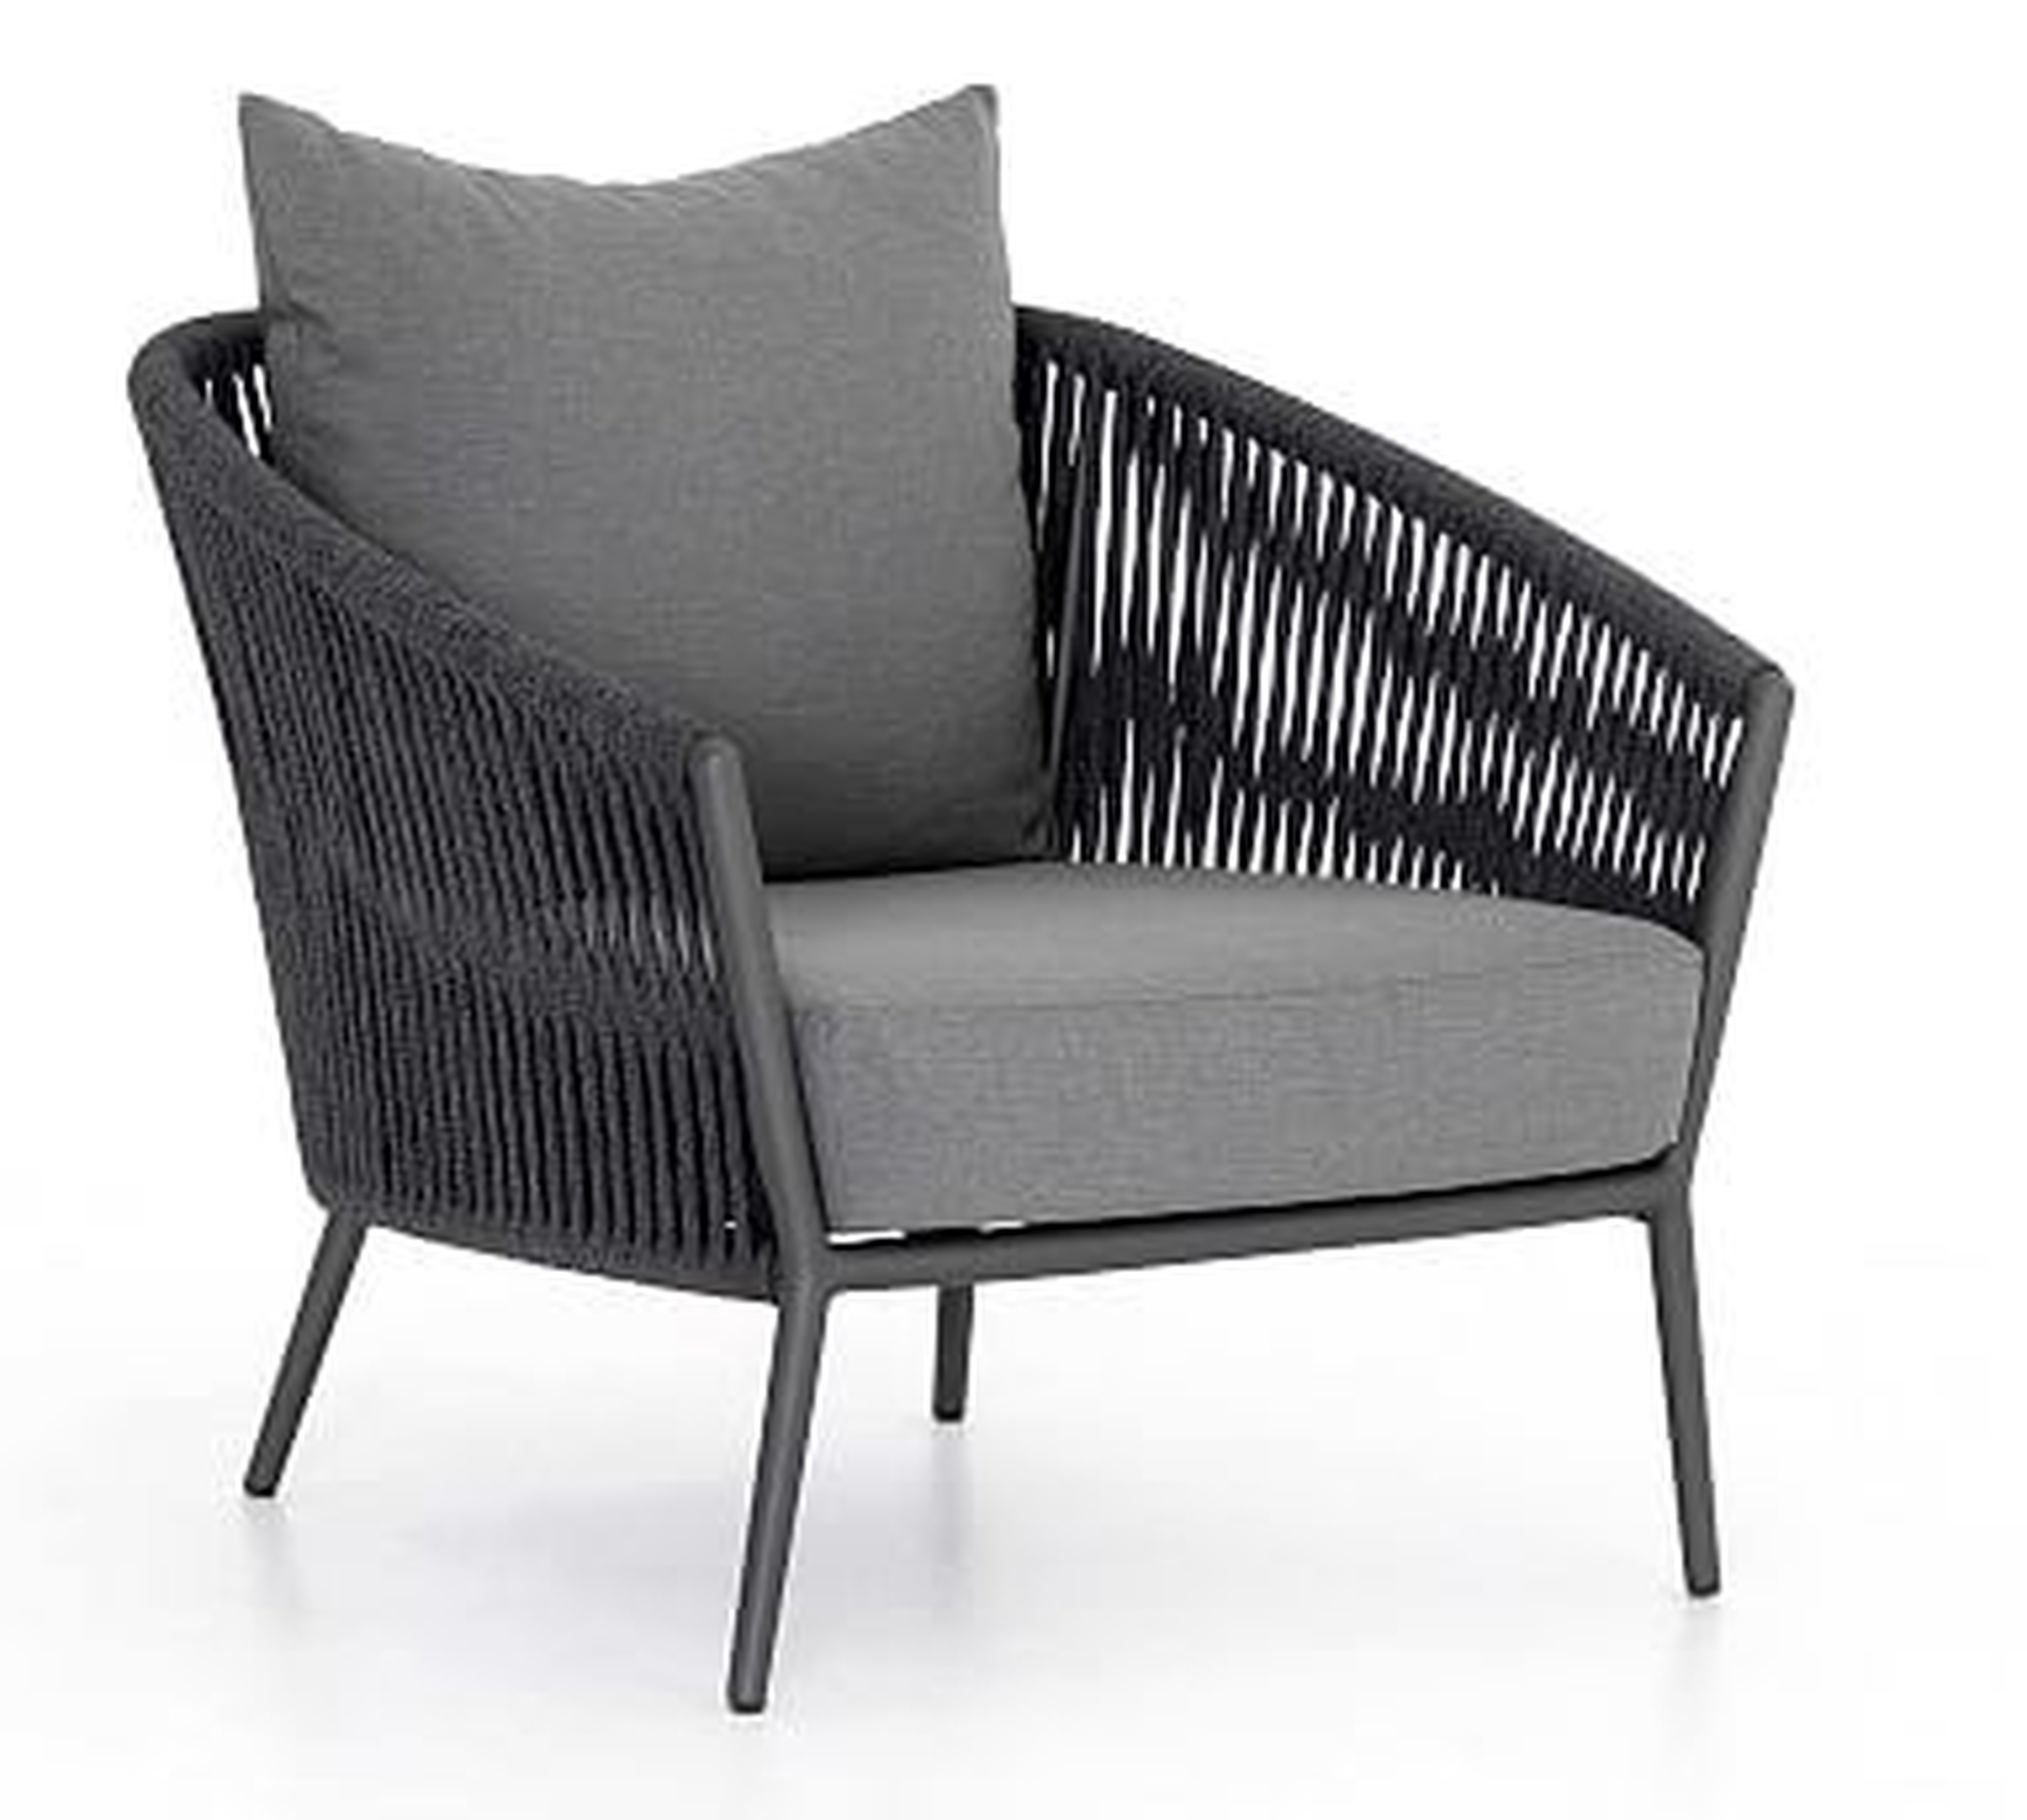 Darley Outdoor Lounge Chair, Charcoal &amp; Bronze - Pottery Barn